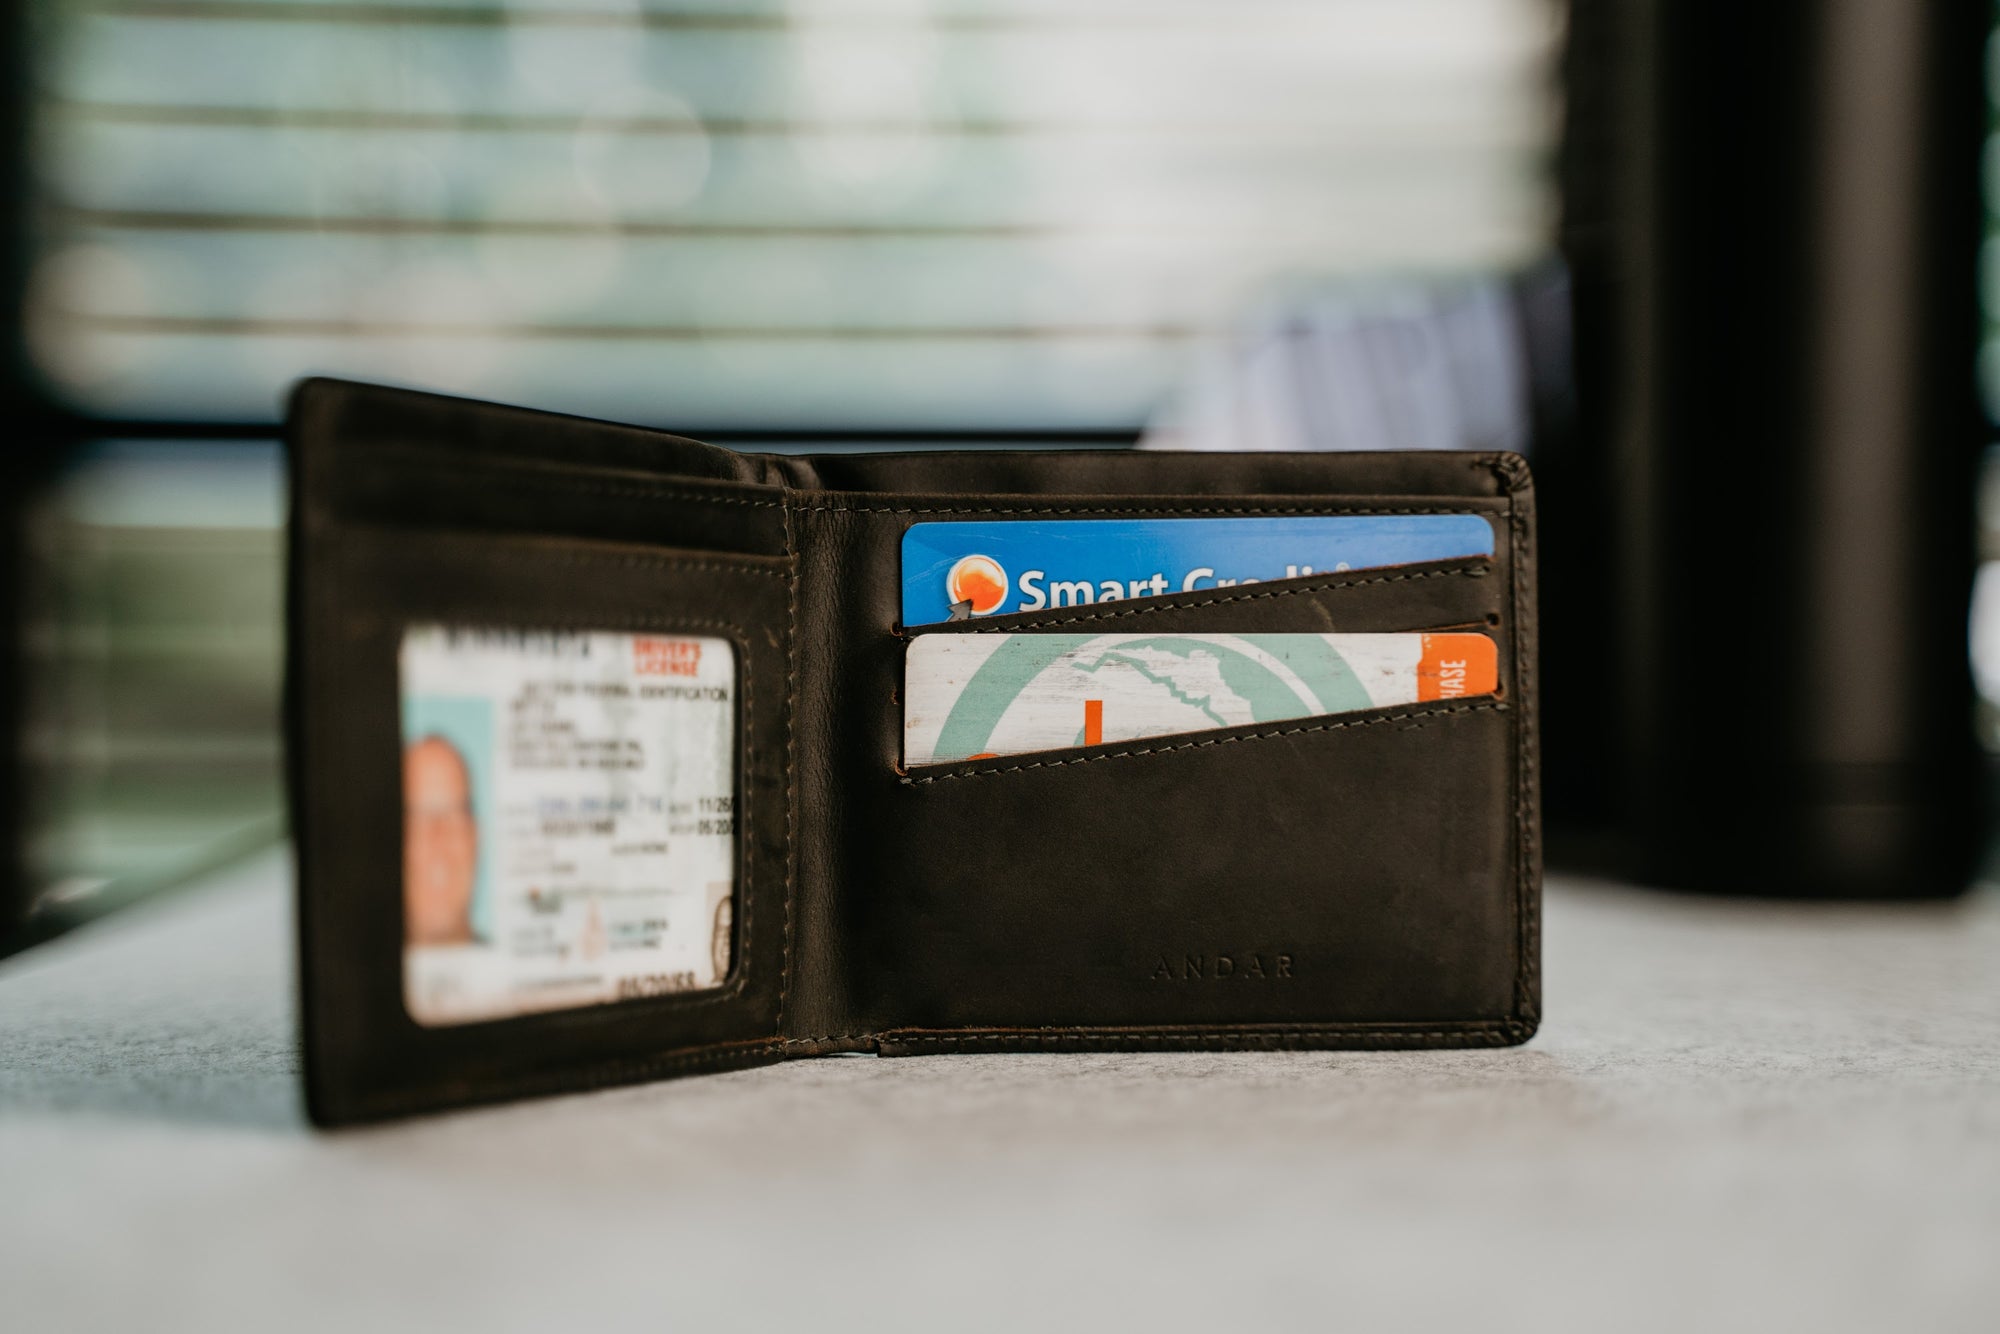 13 Steps To Finding a Lost Wallet